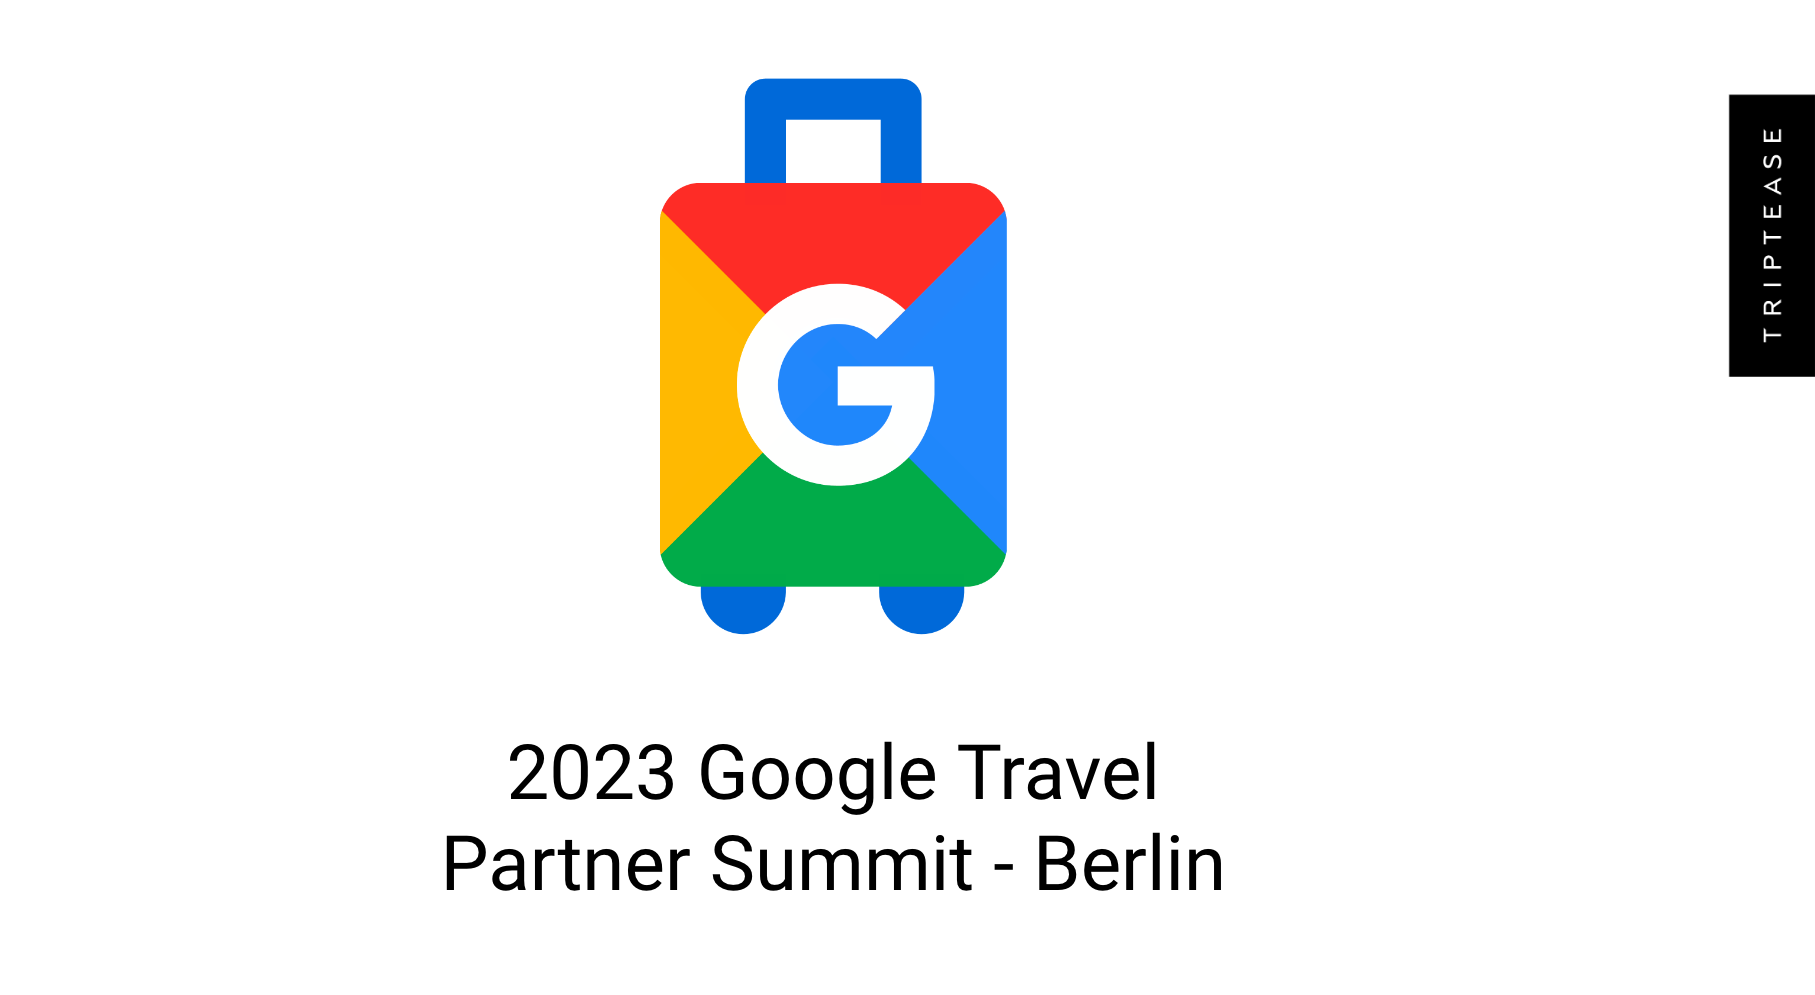 Everything hoteliers need to know from the Google Travel Partner Summit